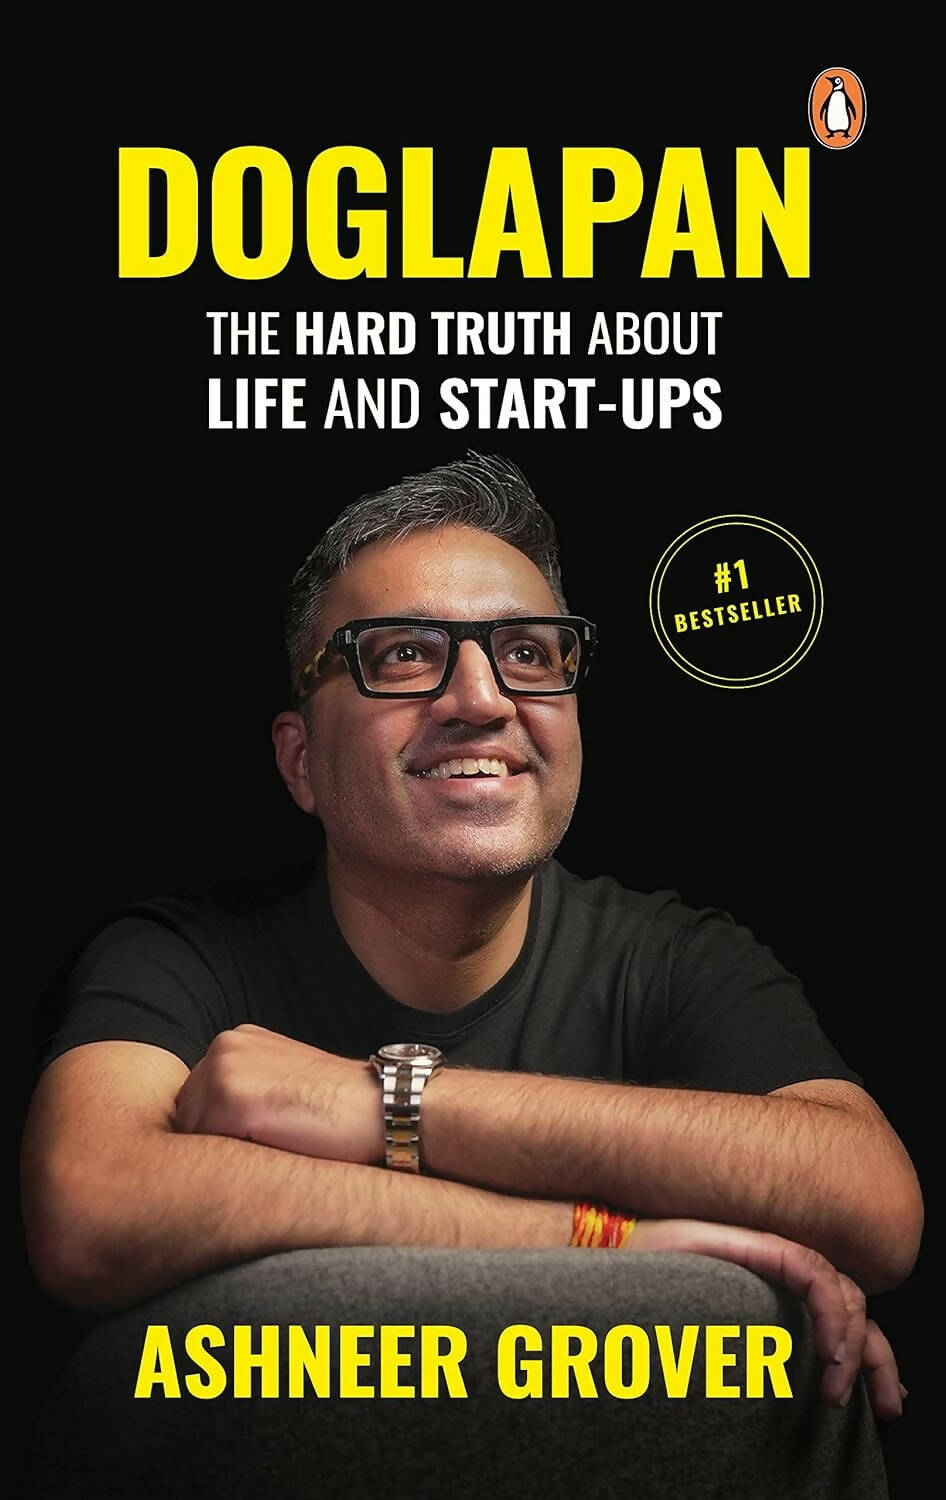 Doglapan: The Hard Truth about Life and Start-Ups By Ashneer Grover